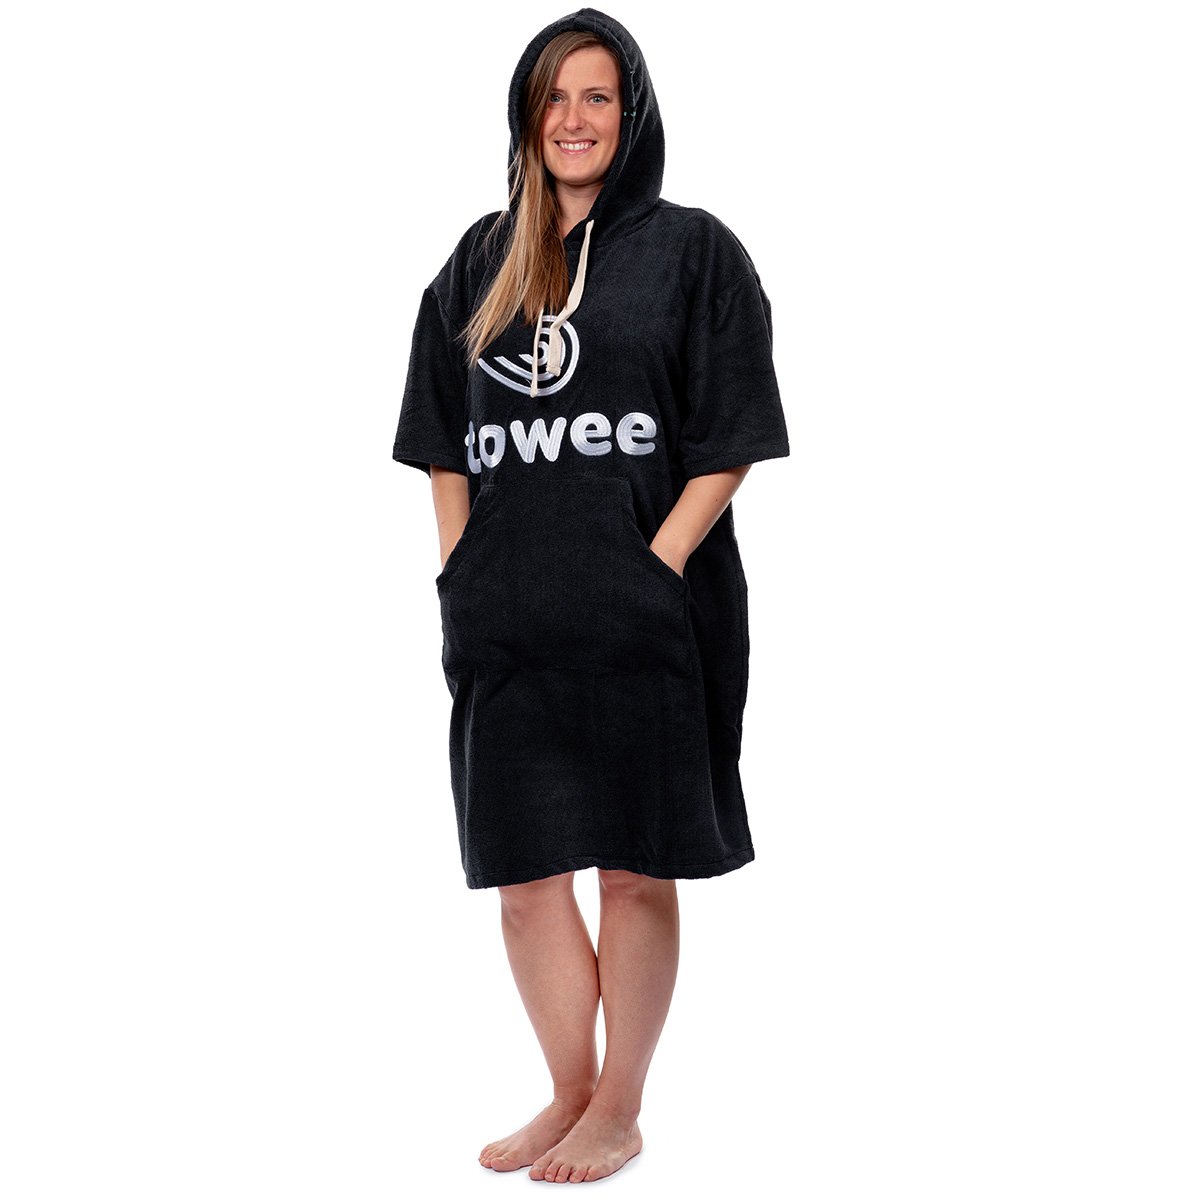 Surf poncho Towee anthracite with white embroidery, 70 x 100 cm